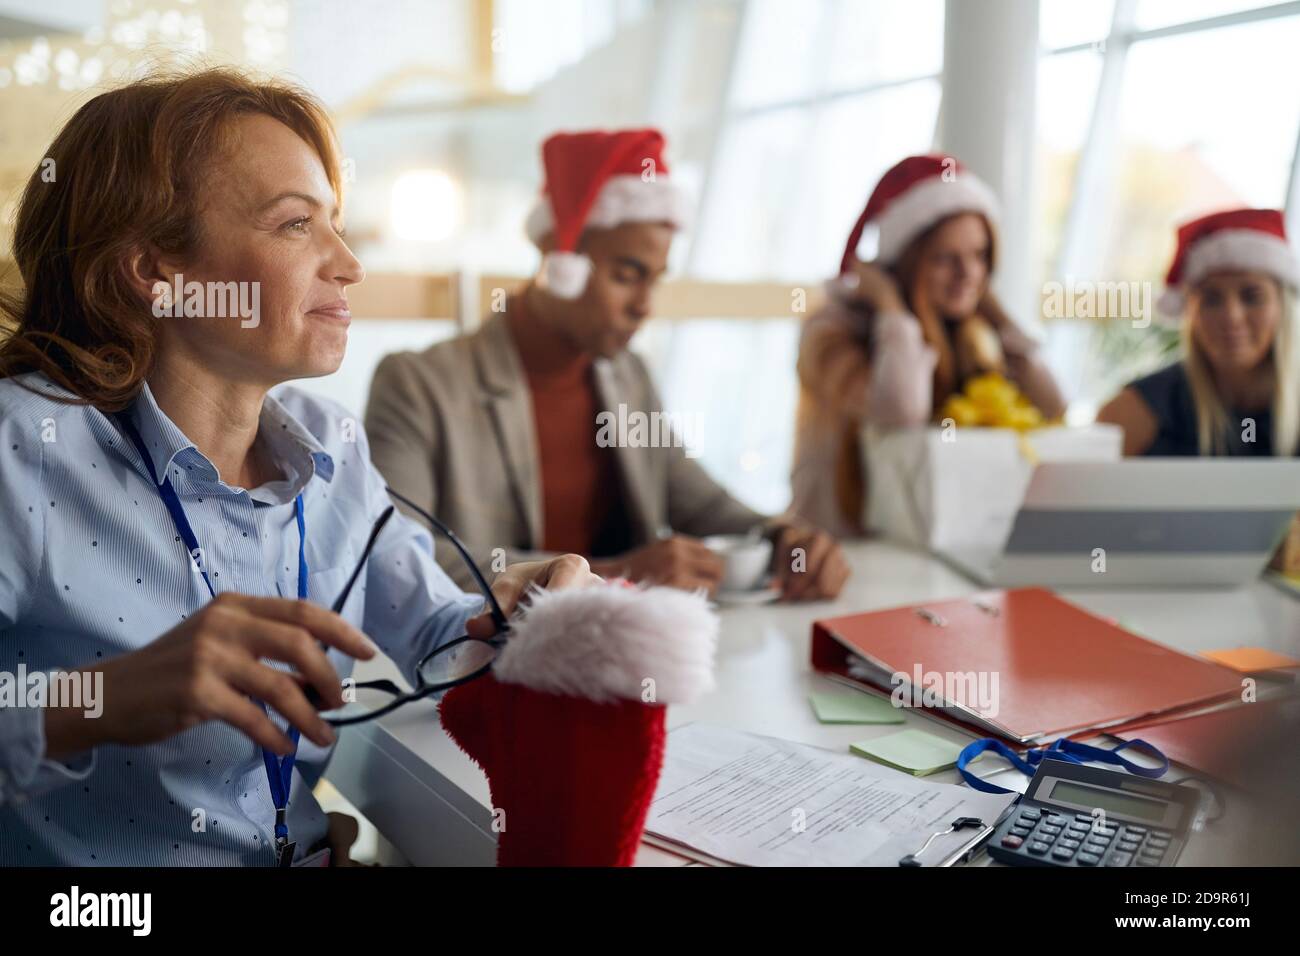 christmastime in the bright lighted office. boss with employees having a good time Stock Photo